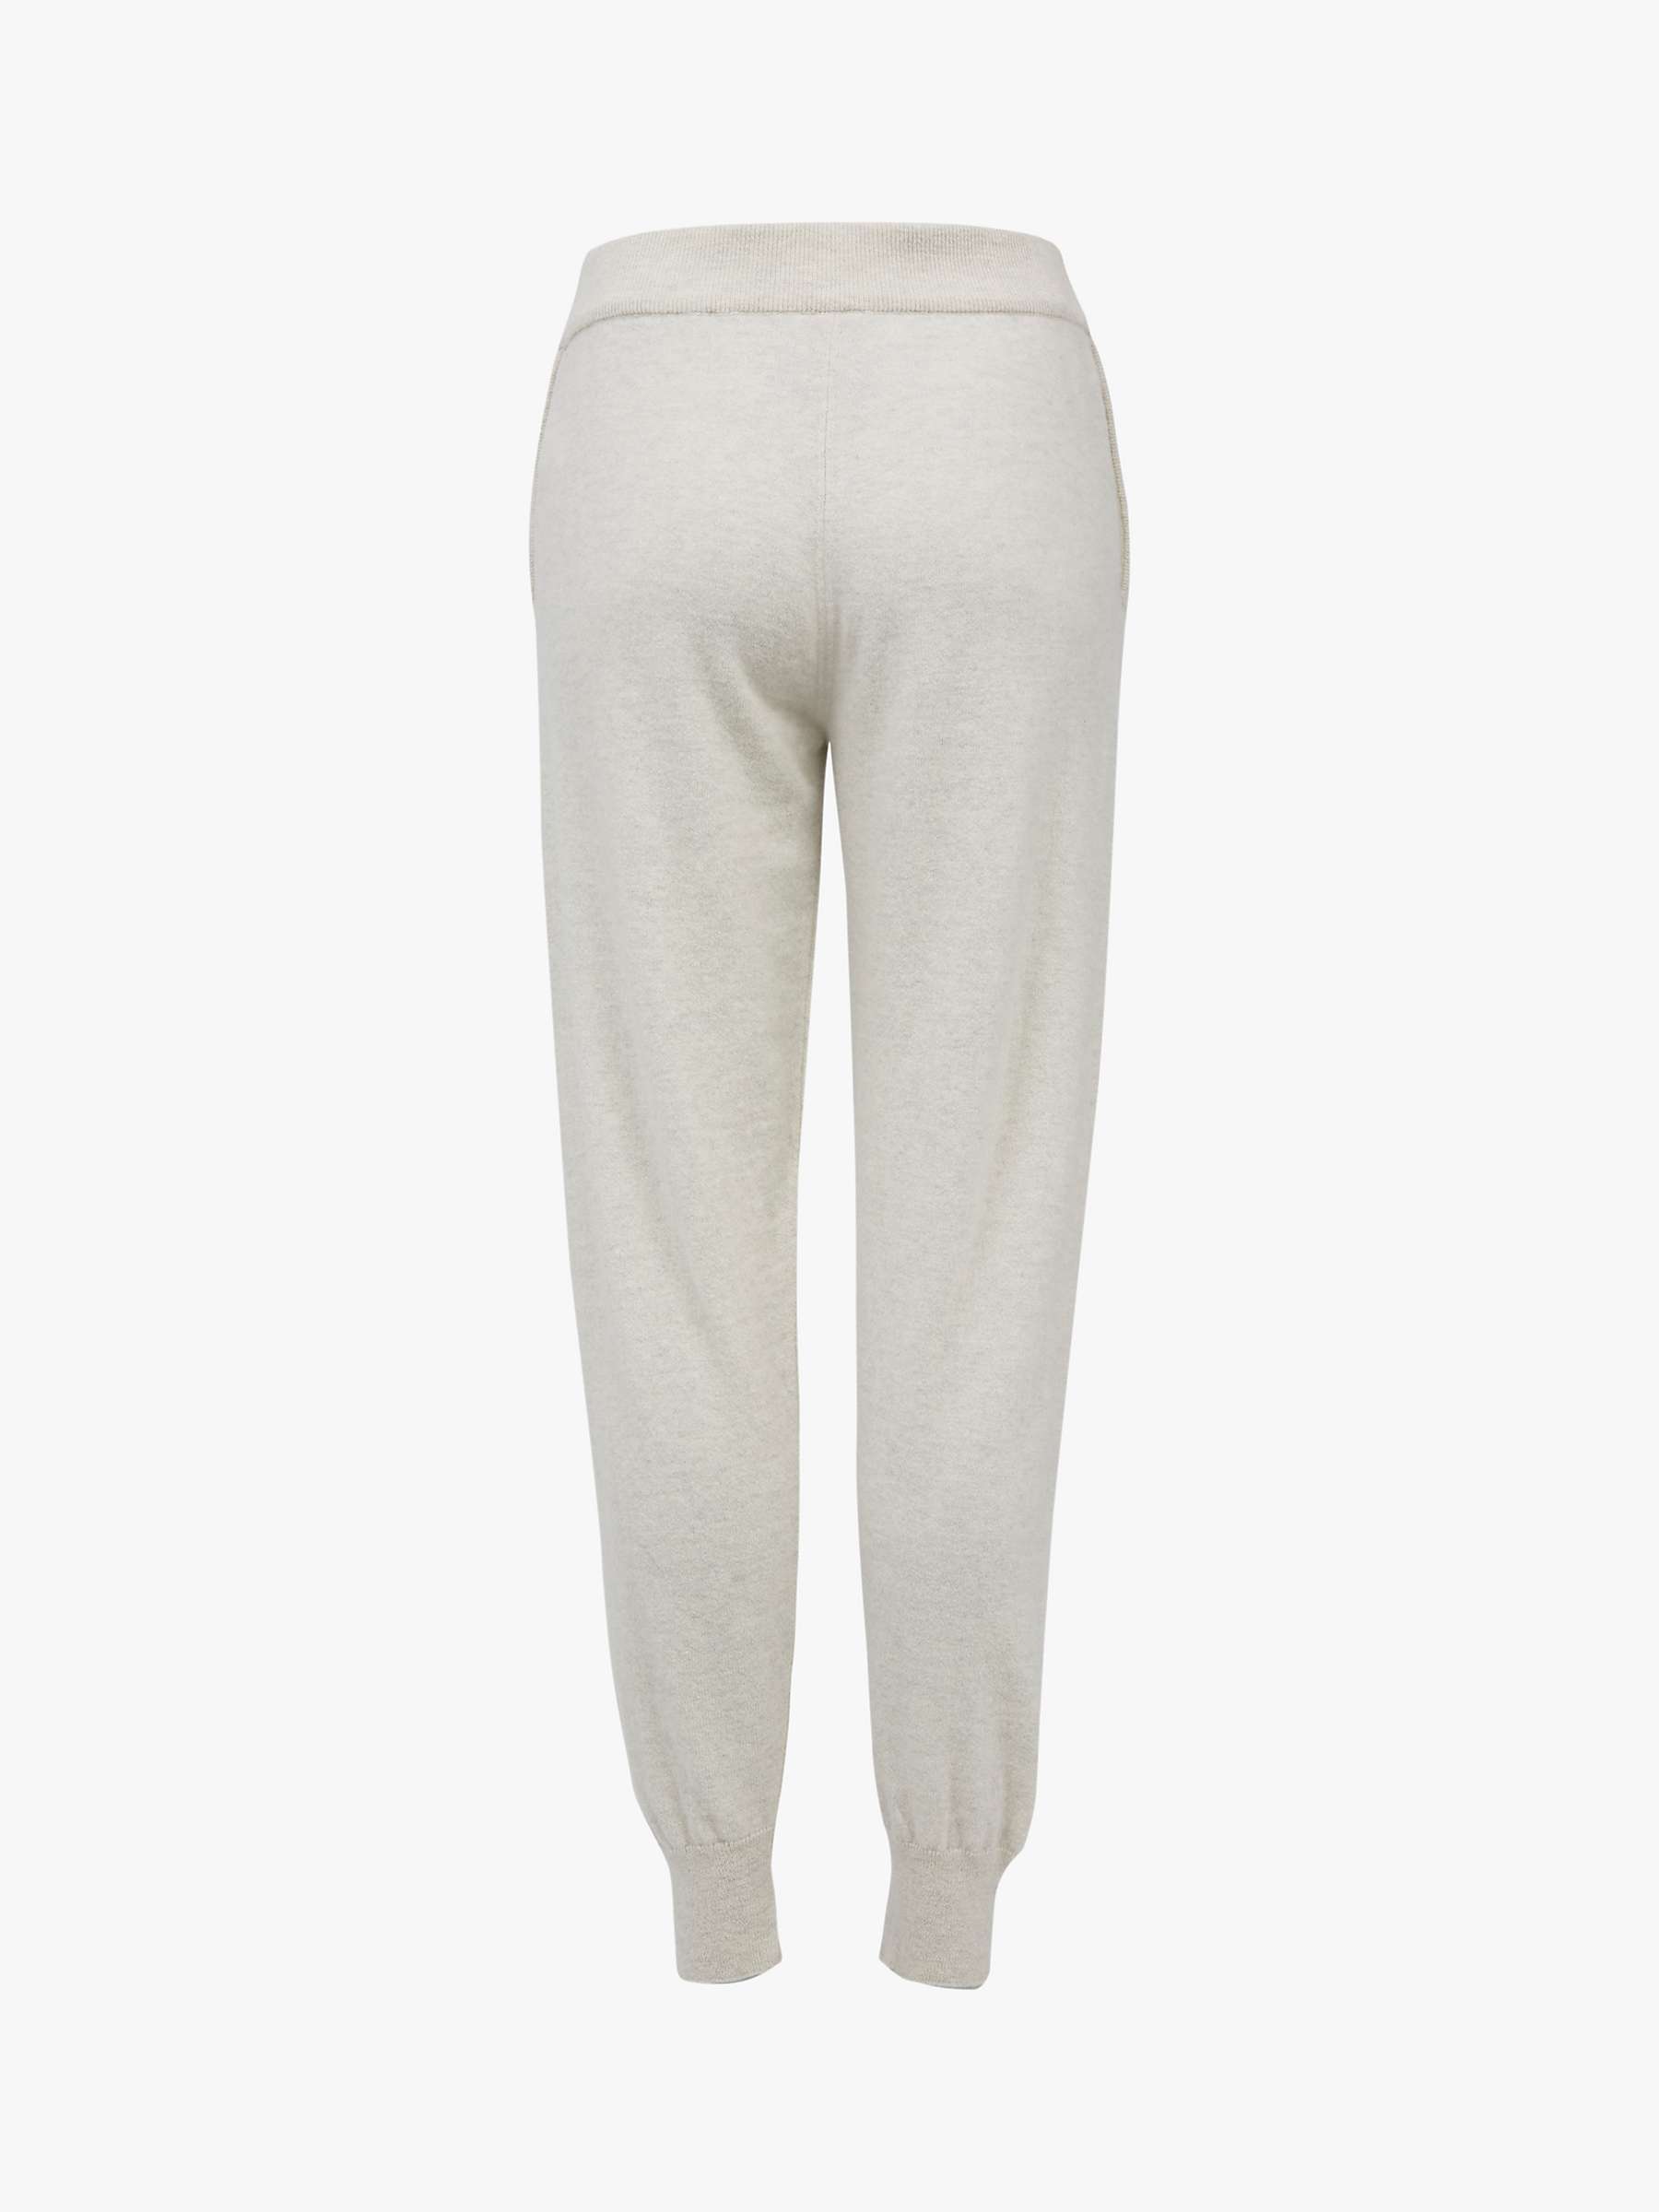 Buy Celtic & Co. Geelong Wool Lounge Joggers, Pearl Grey Online at johnlewis.com